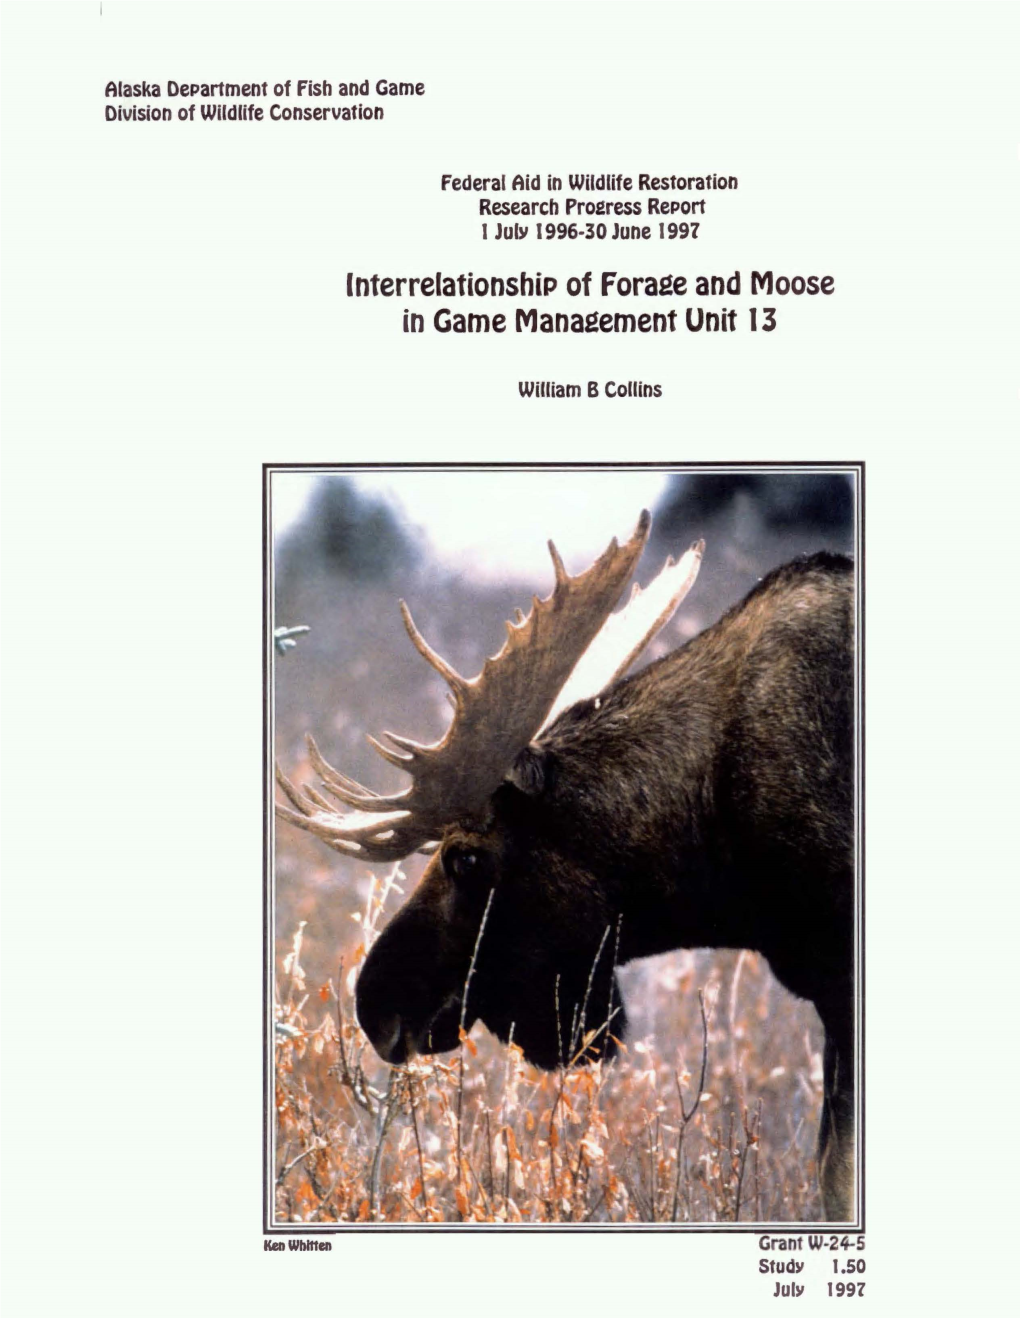 Interrelationship of Forage and Moose in Game Management Unit 13